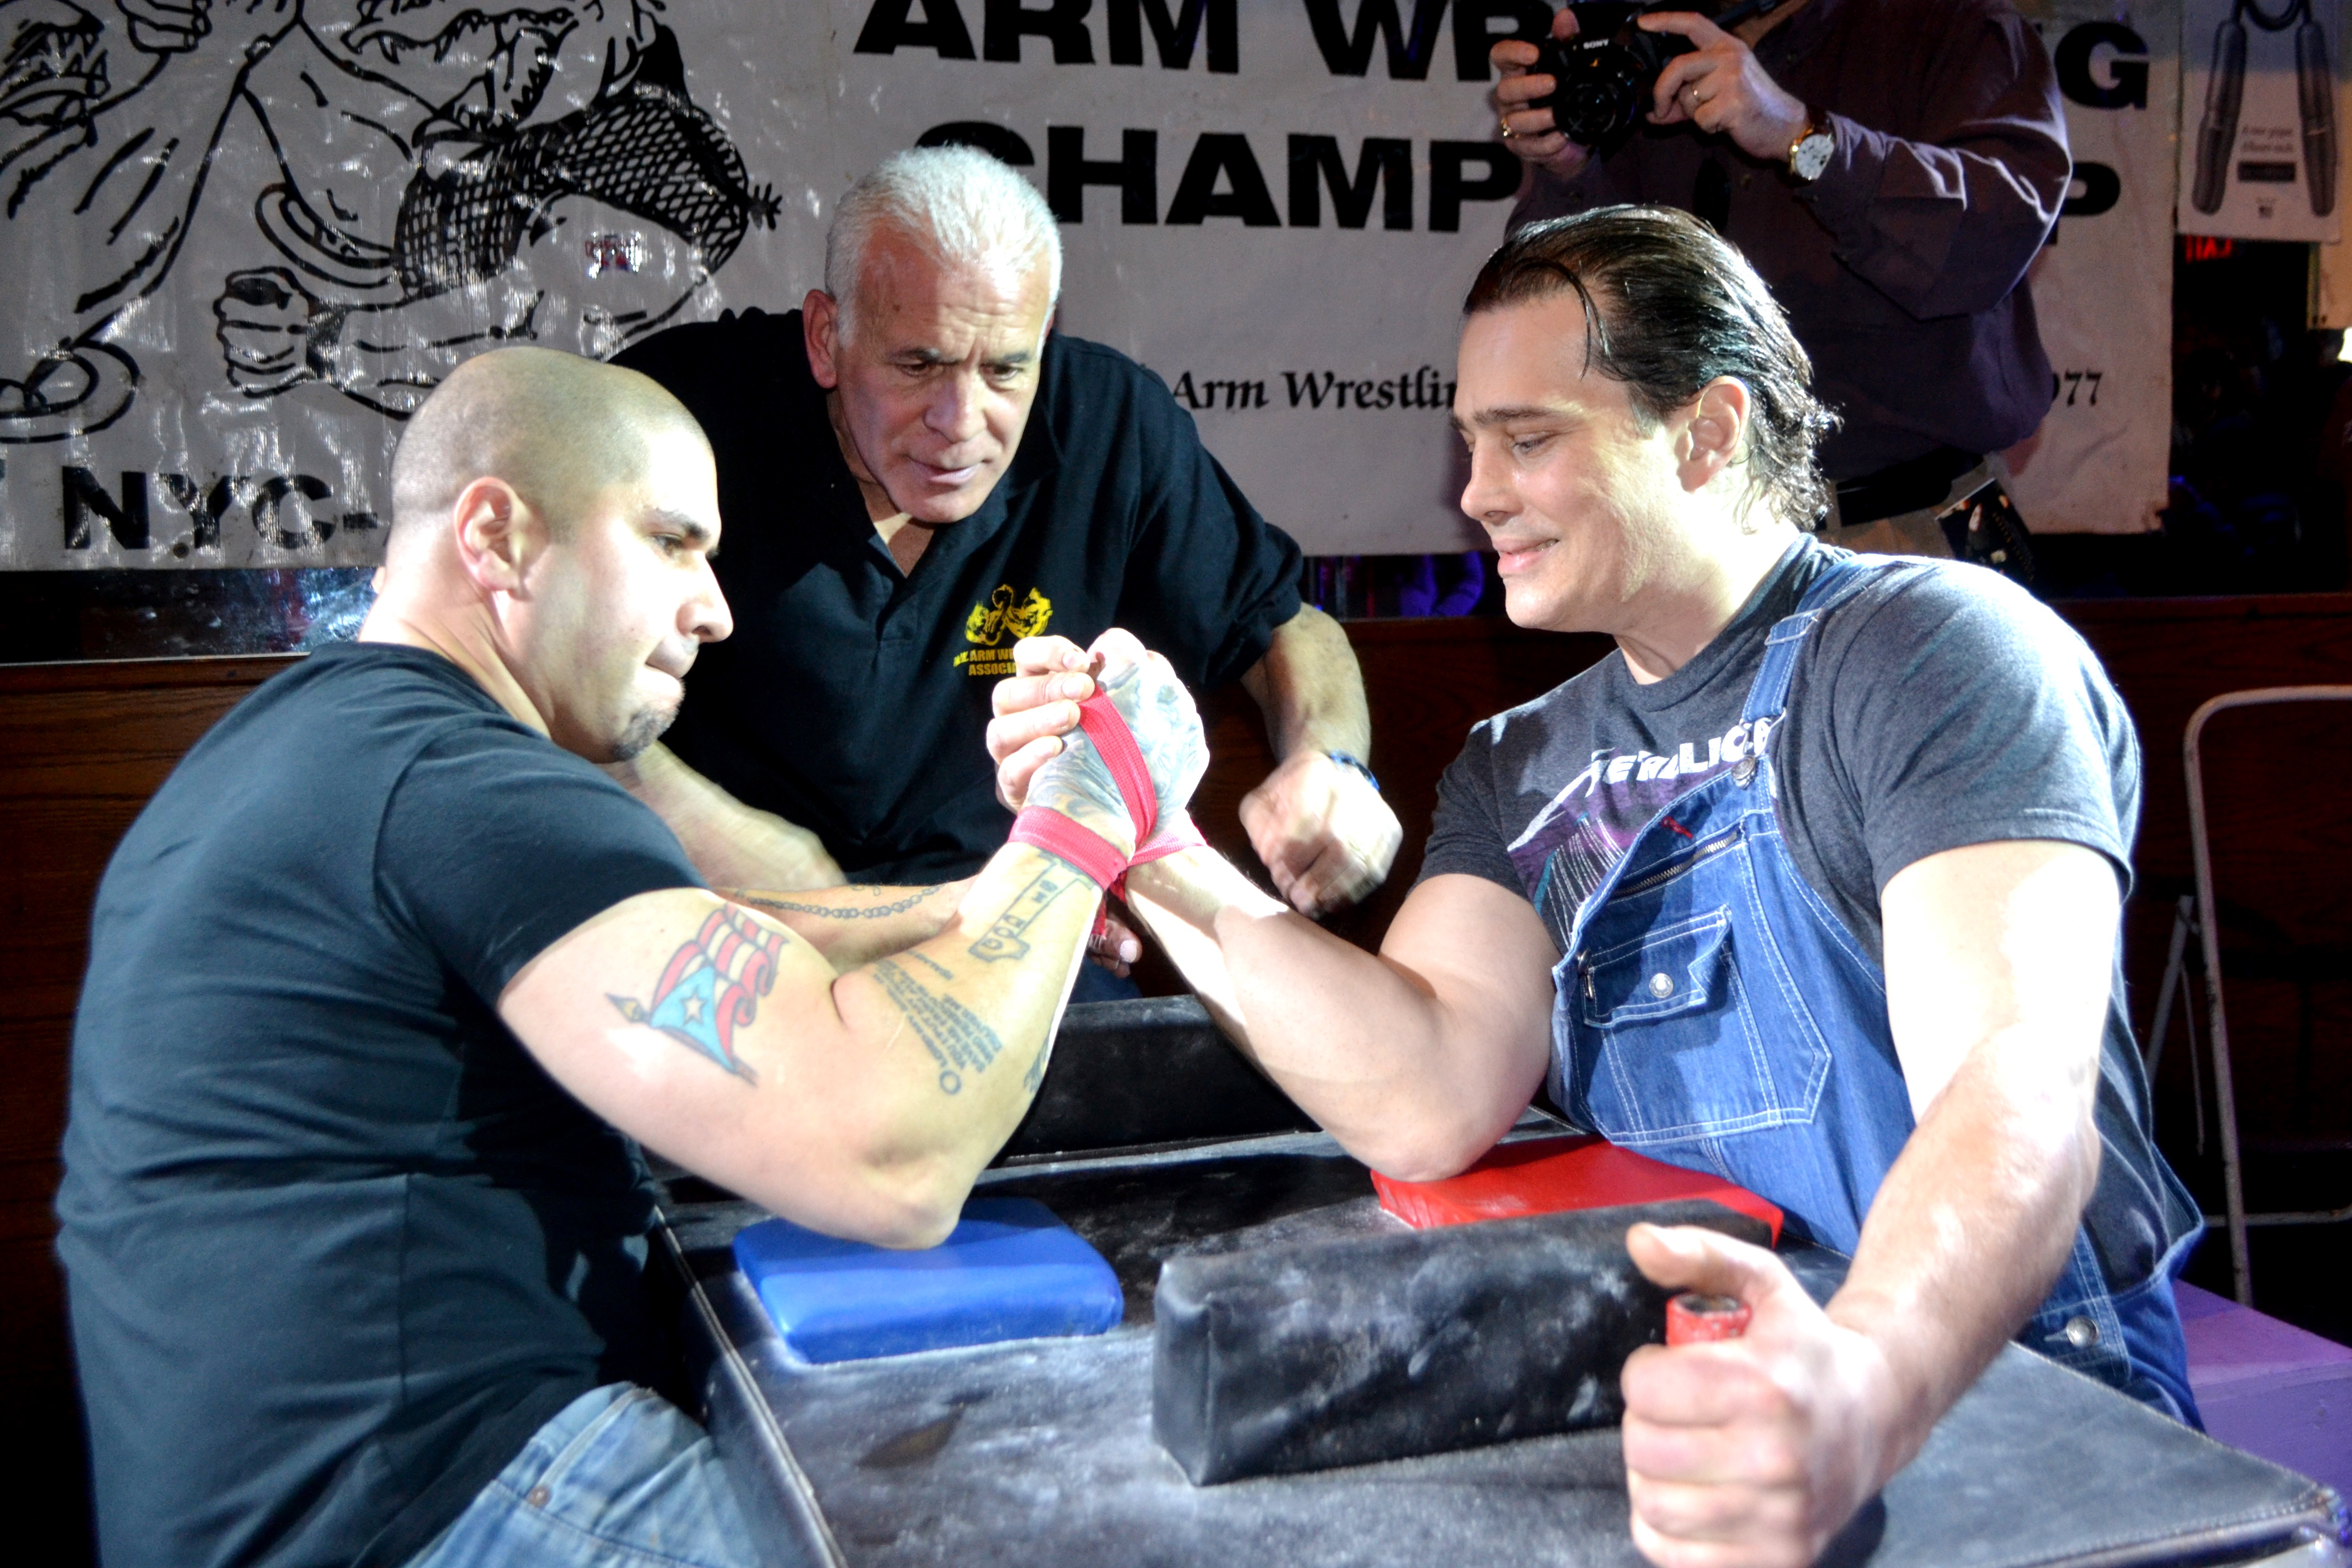 Angel Cosme (left) and Jason Vale (right) took home top prizes at the NYC Sit-Down Arm Wrestling Championships.